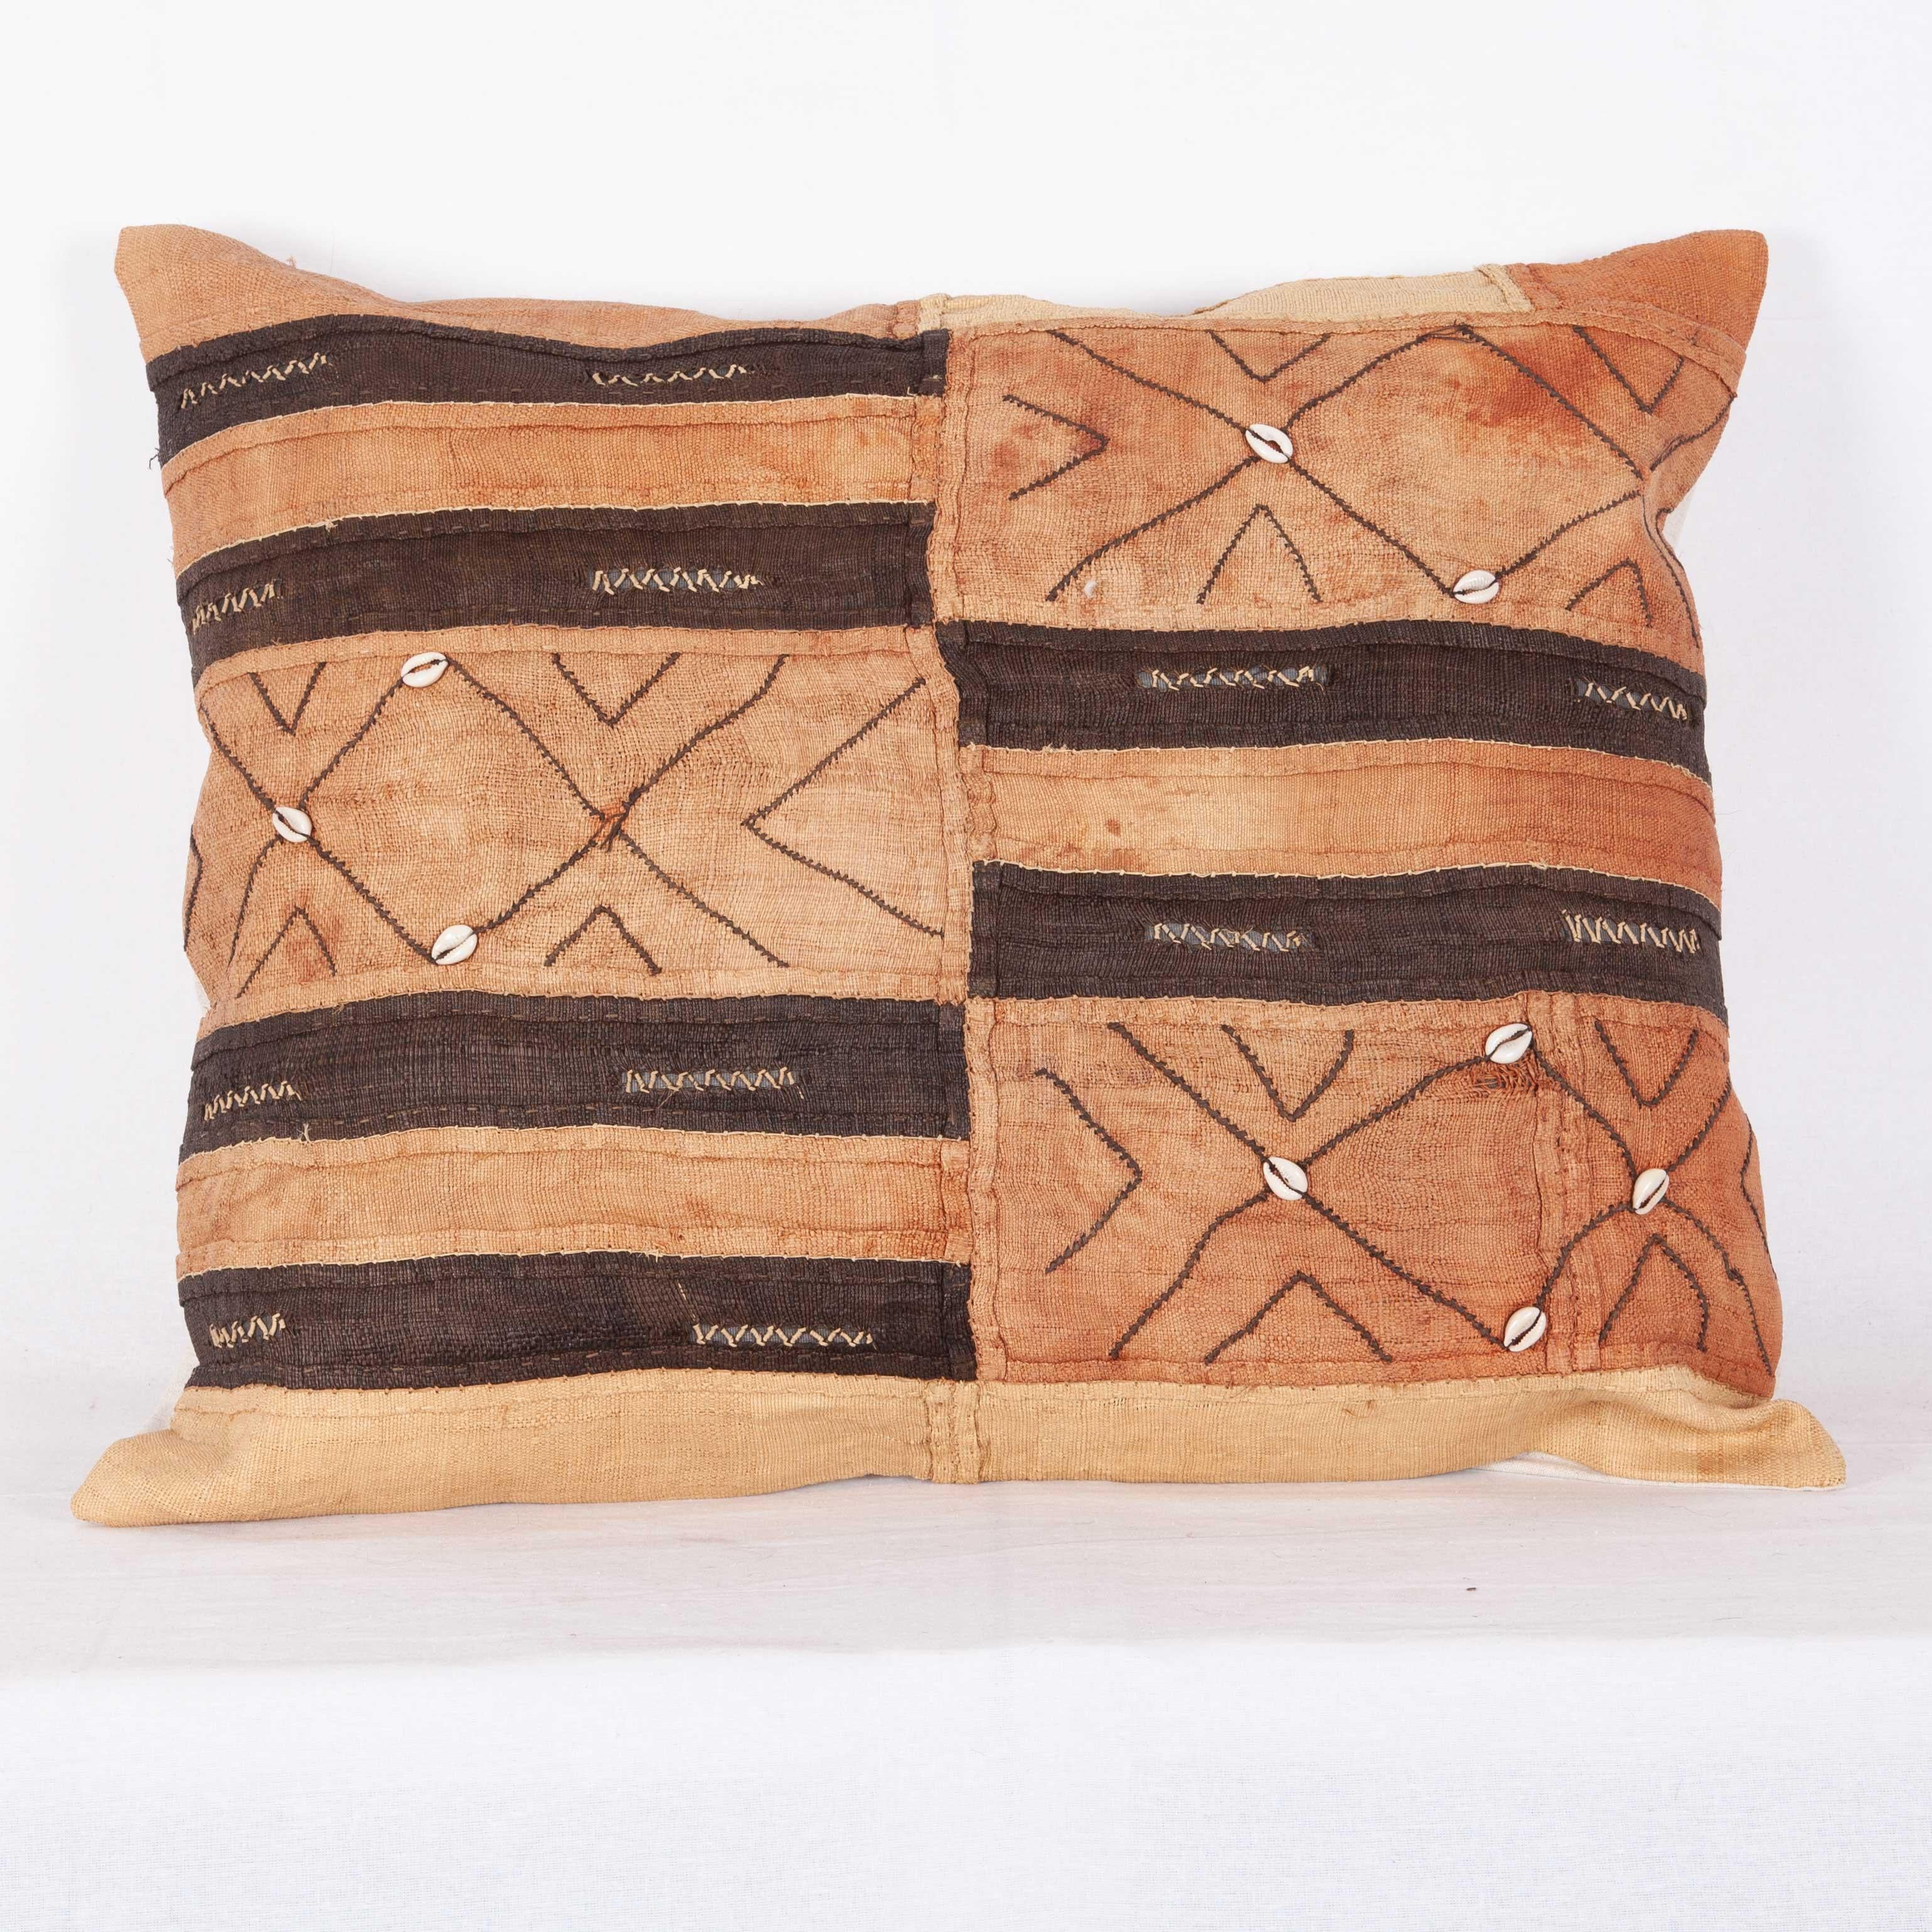 Vintage African Kuba Cloth Pillow Cases, Mid-20th Century For Sale 5